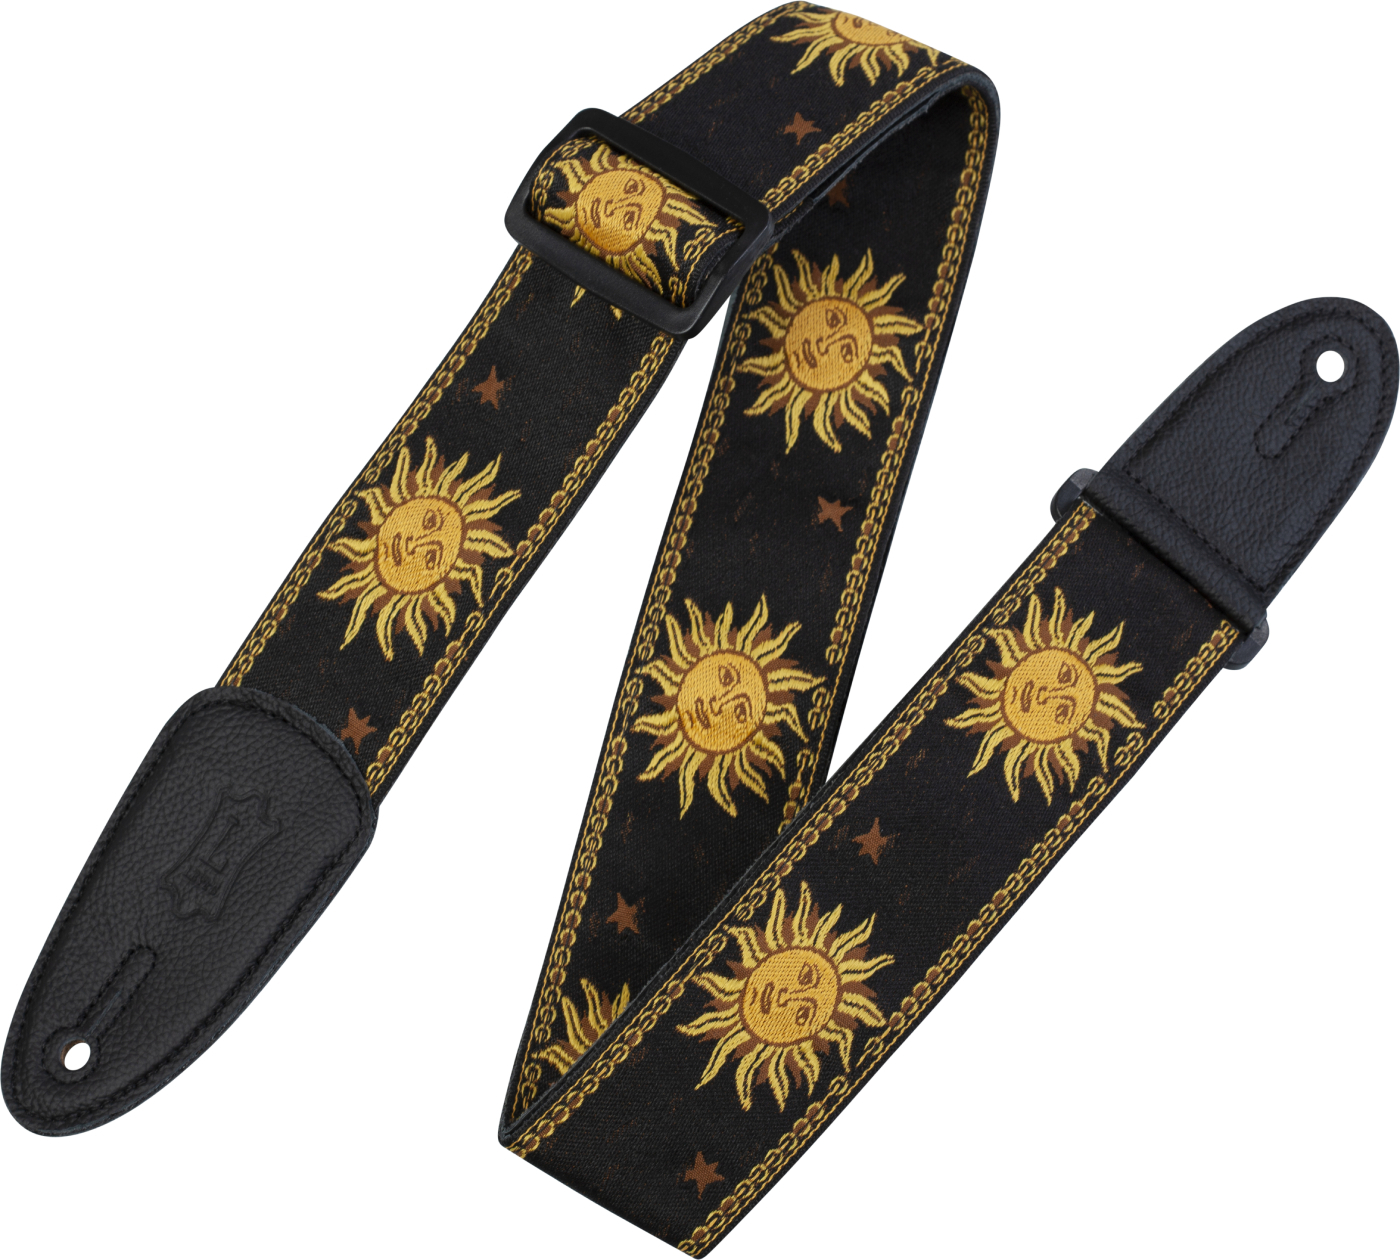 Levy's Sangle Polyester Et Cuir Mpjg-sun Black - Guitar strap - Main picture